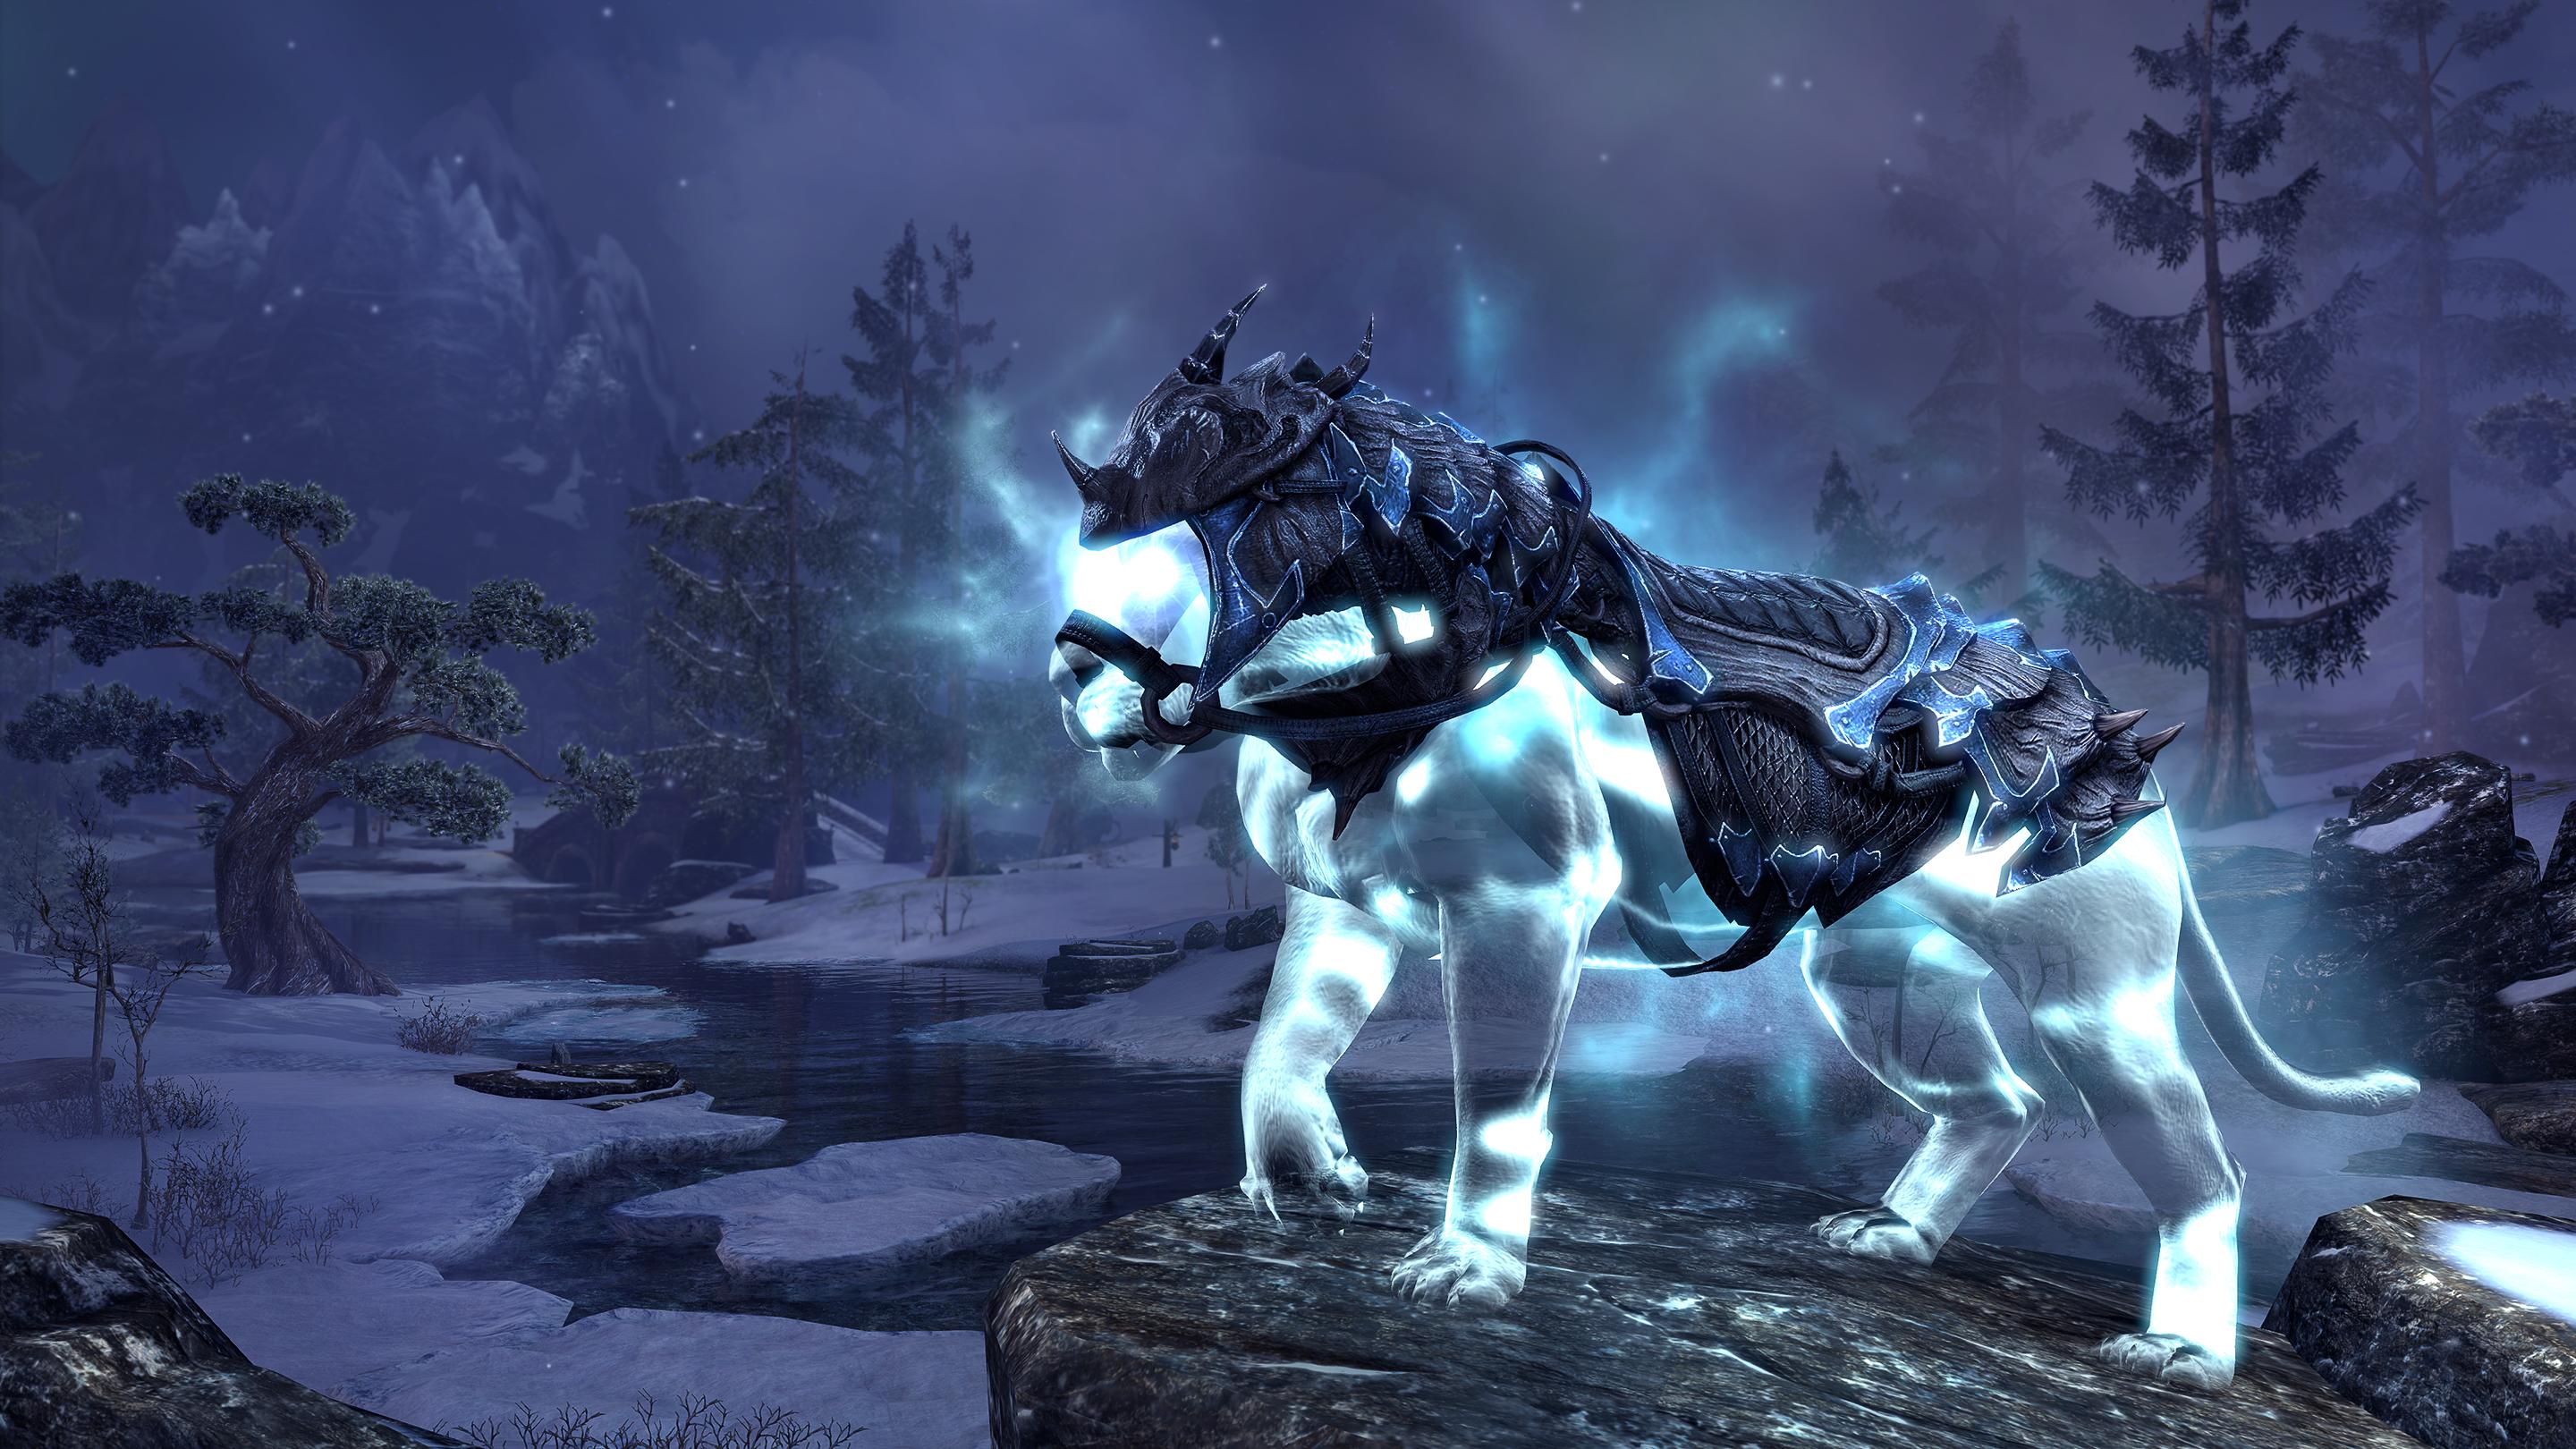 ON-crown store-Dragonscale Frost Senche.jpg.